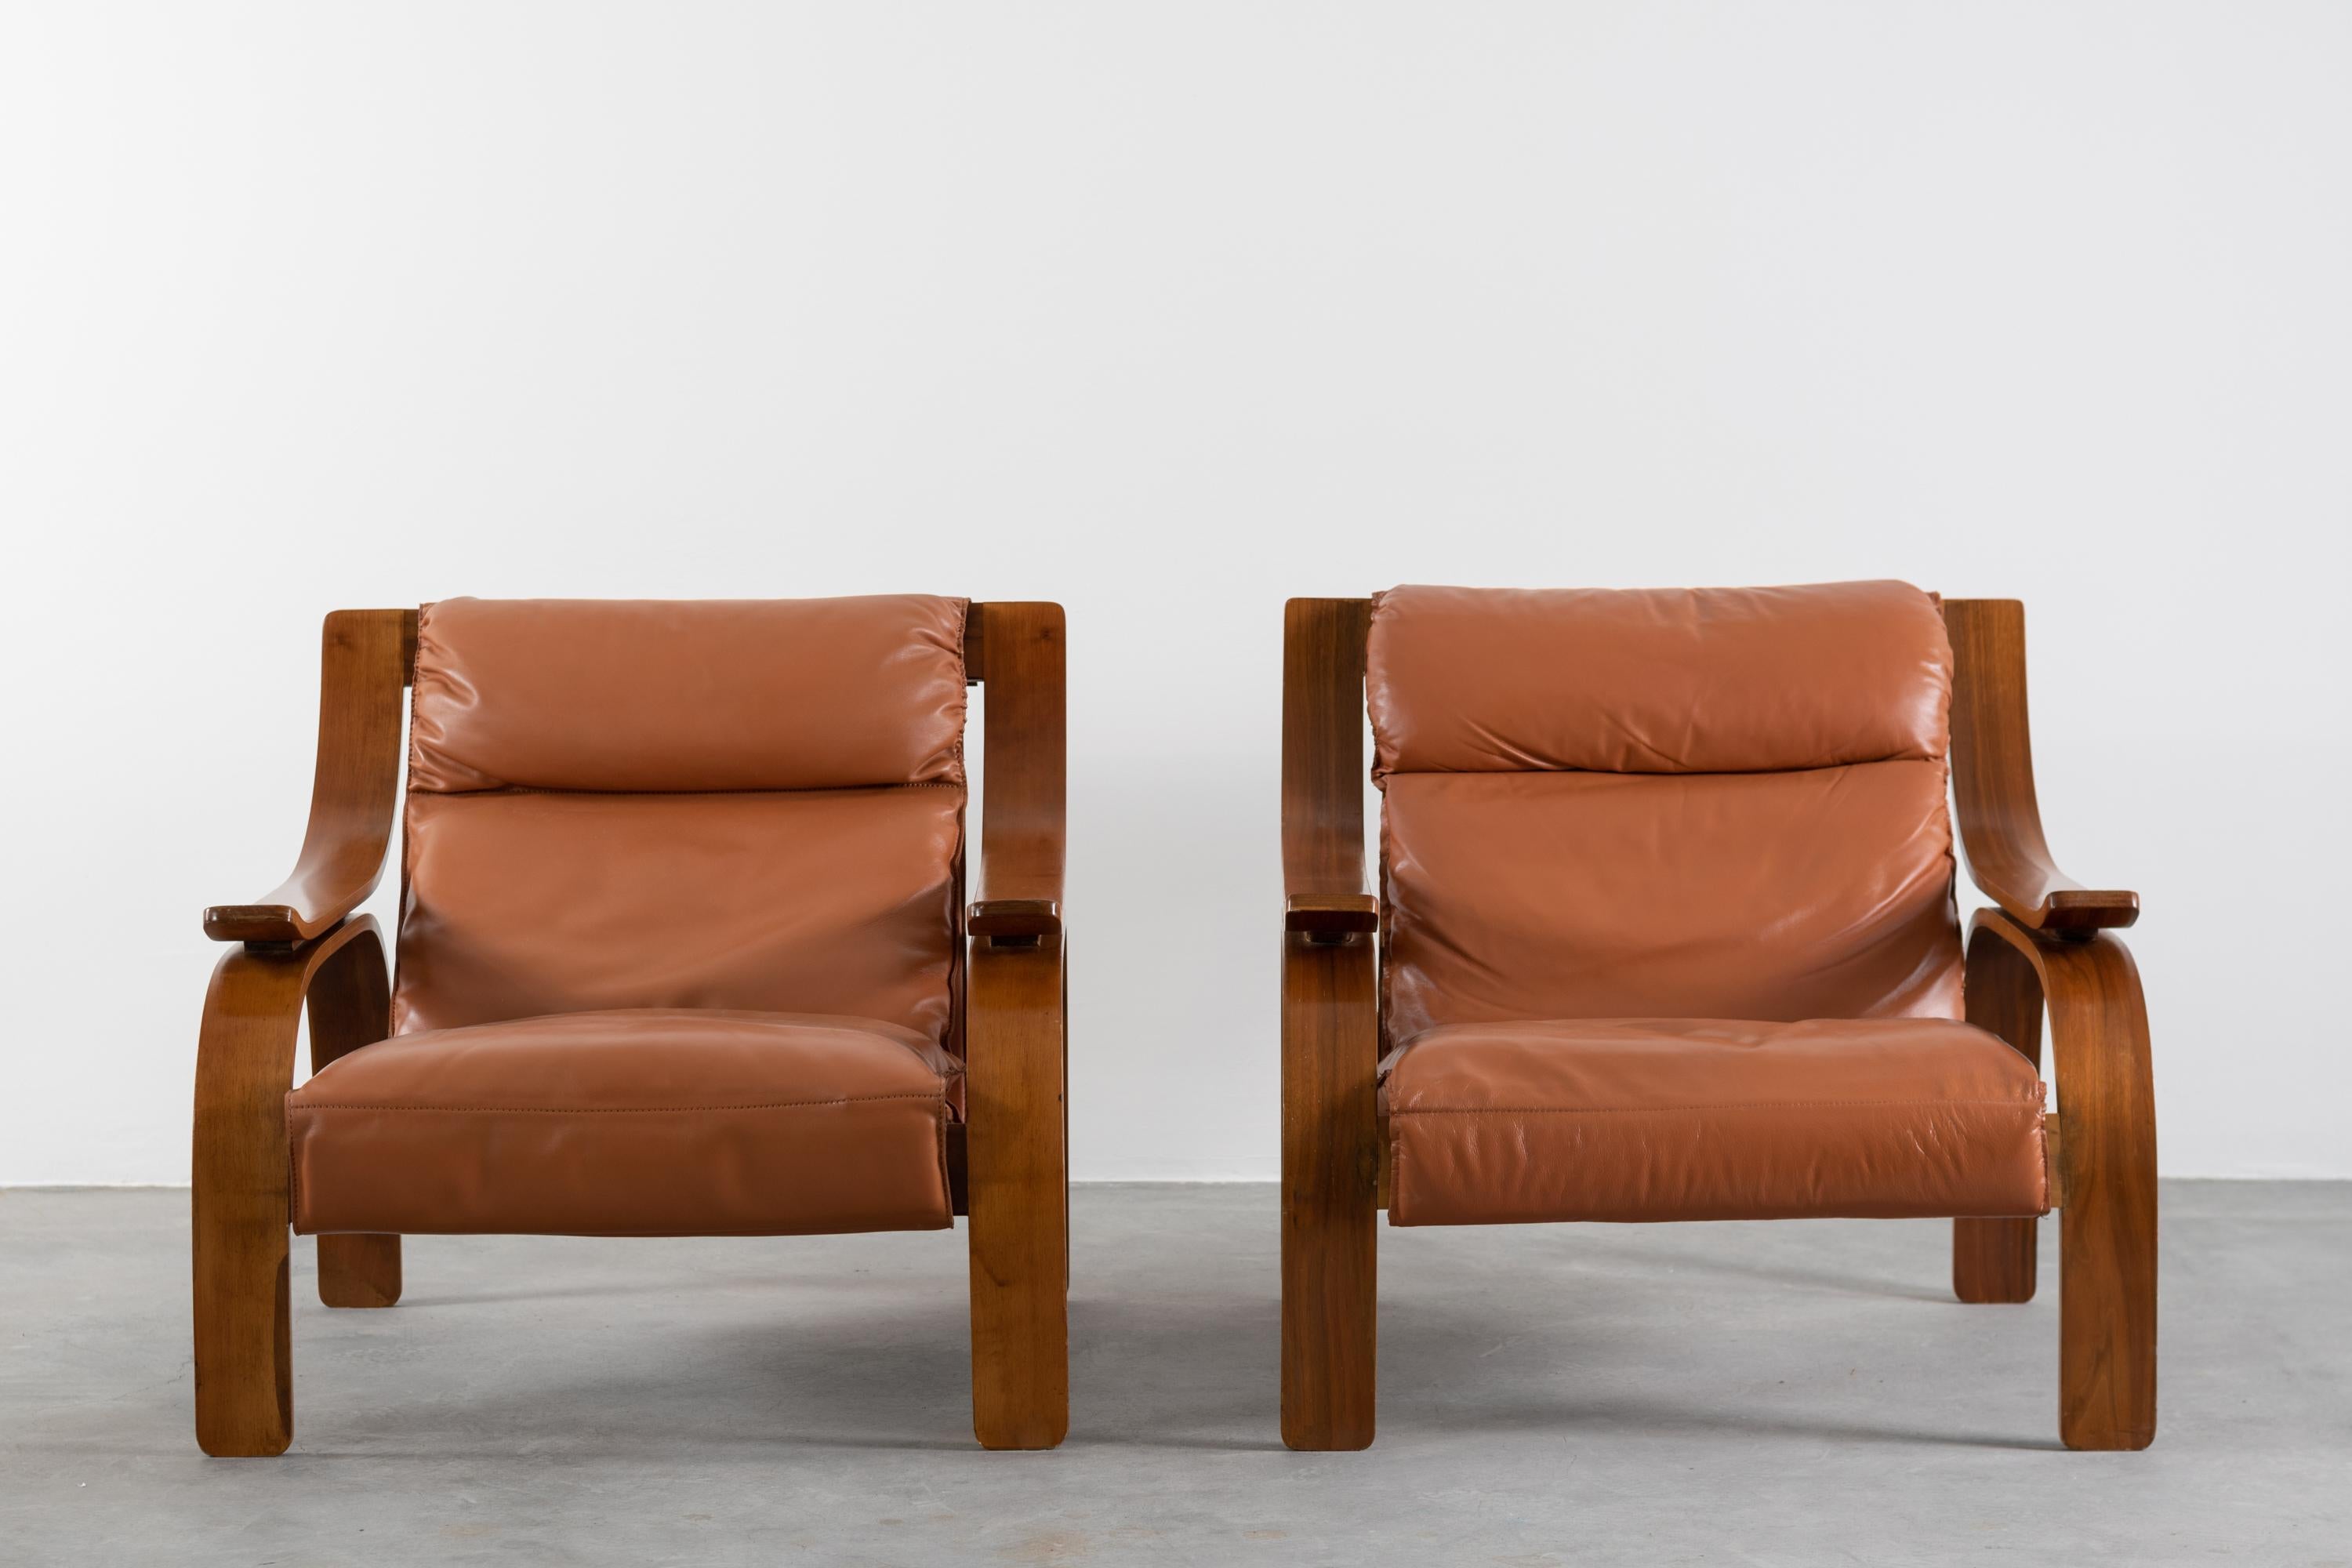 Marco Zanuso
Two armchairs mod. Woodline with wooden structure and leather upholstery.
Arflex Production, Italy, circa 1960.
Measures: 75 x 85 x 70 cm (each)
Literature: Domus n. 418, September 1964.